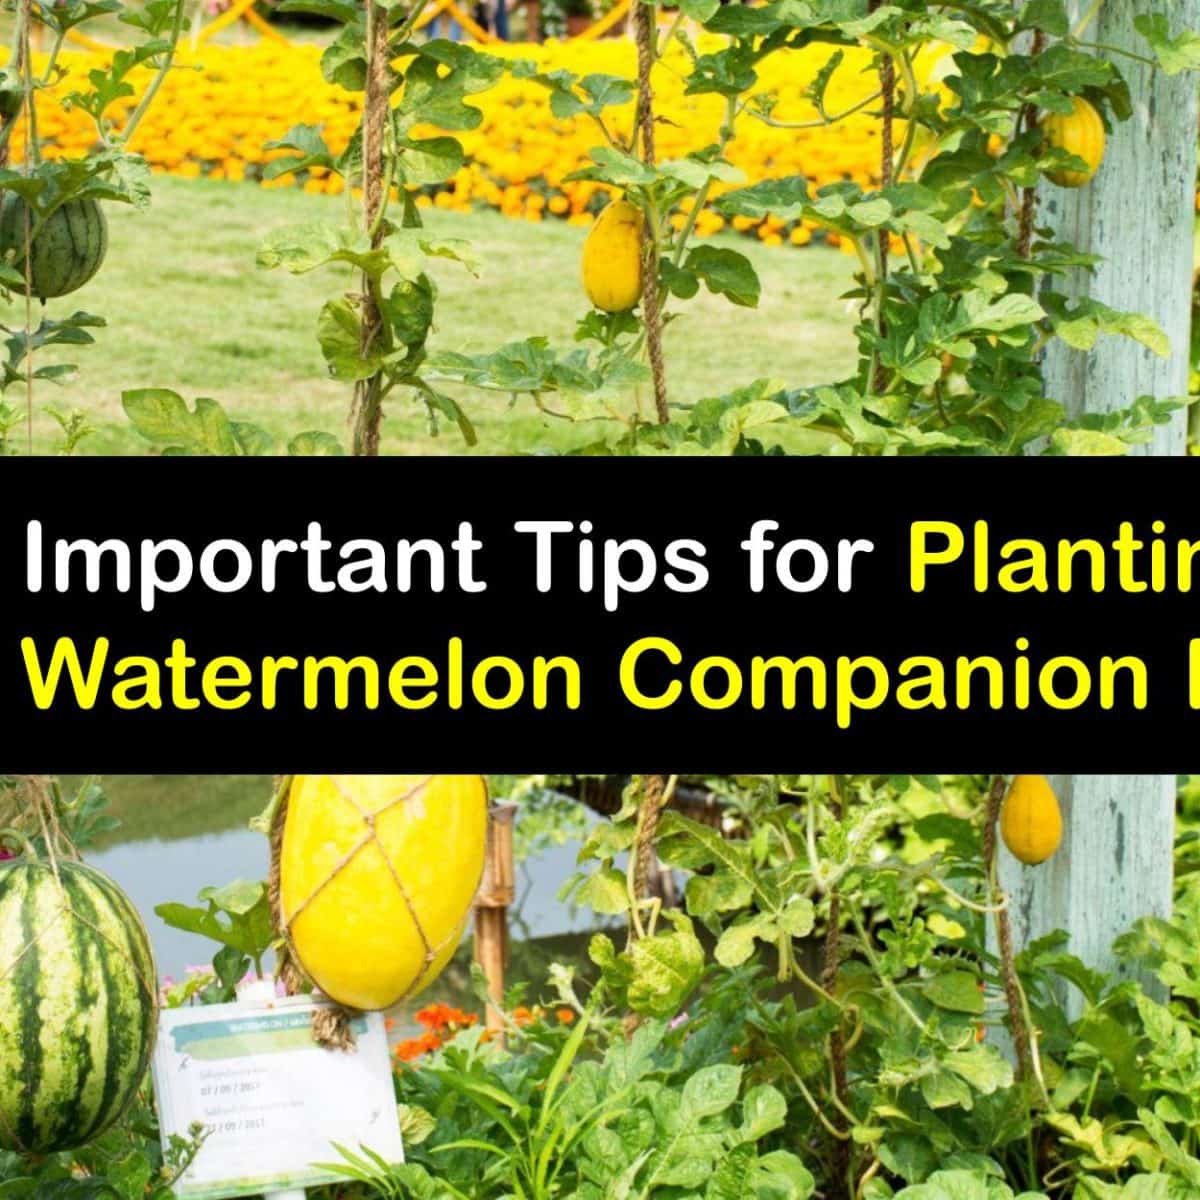 Image of Cucumbers bad companion plant for watermelon